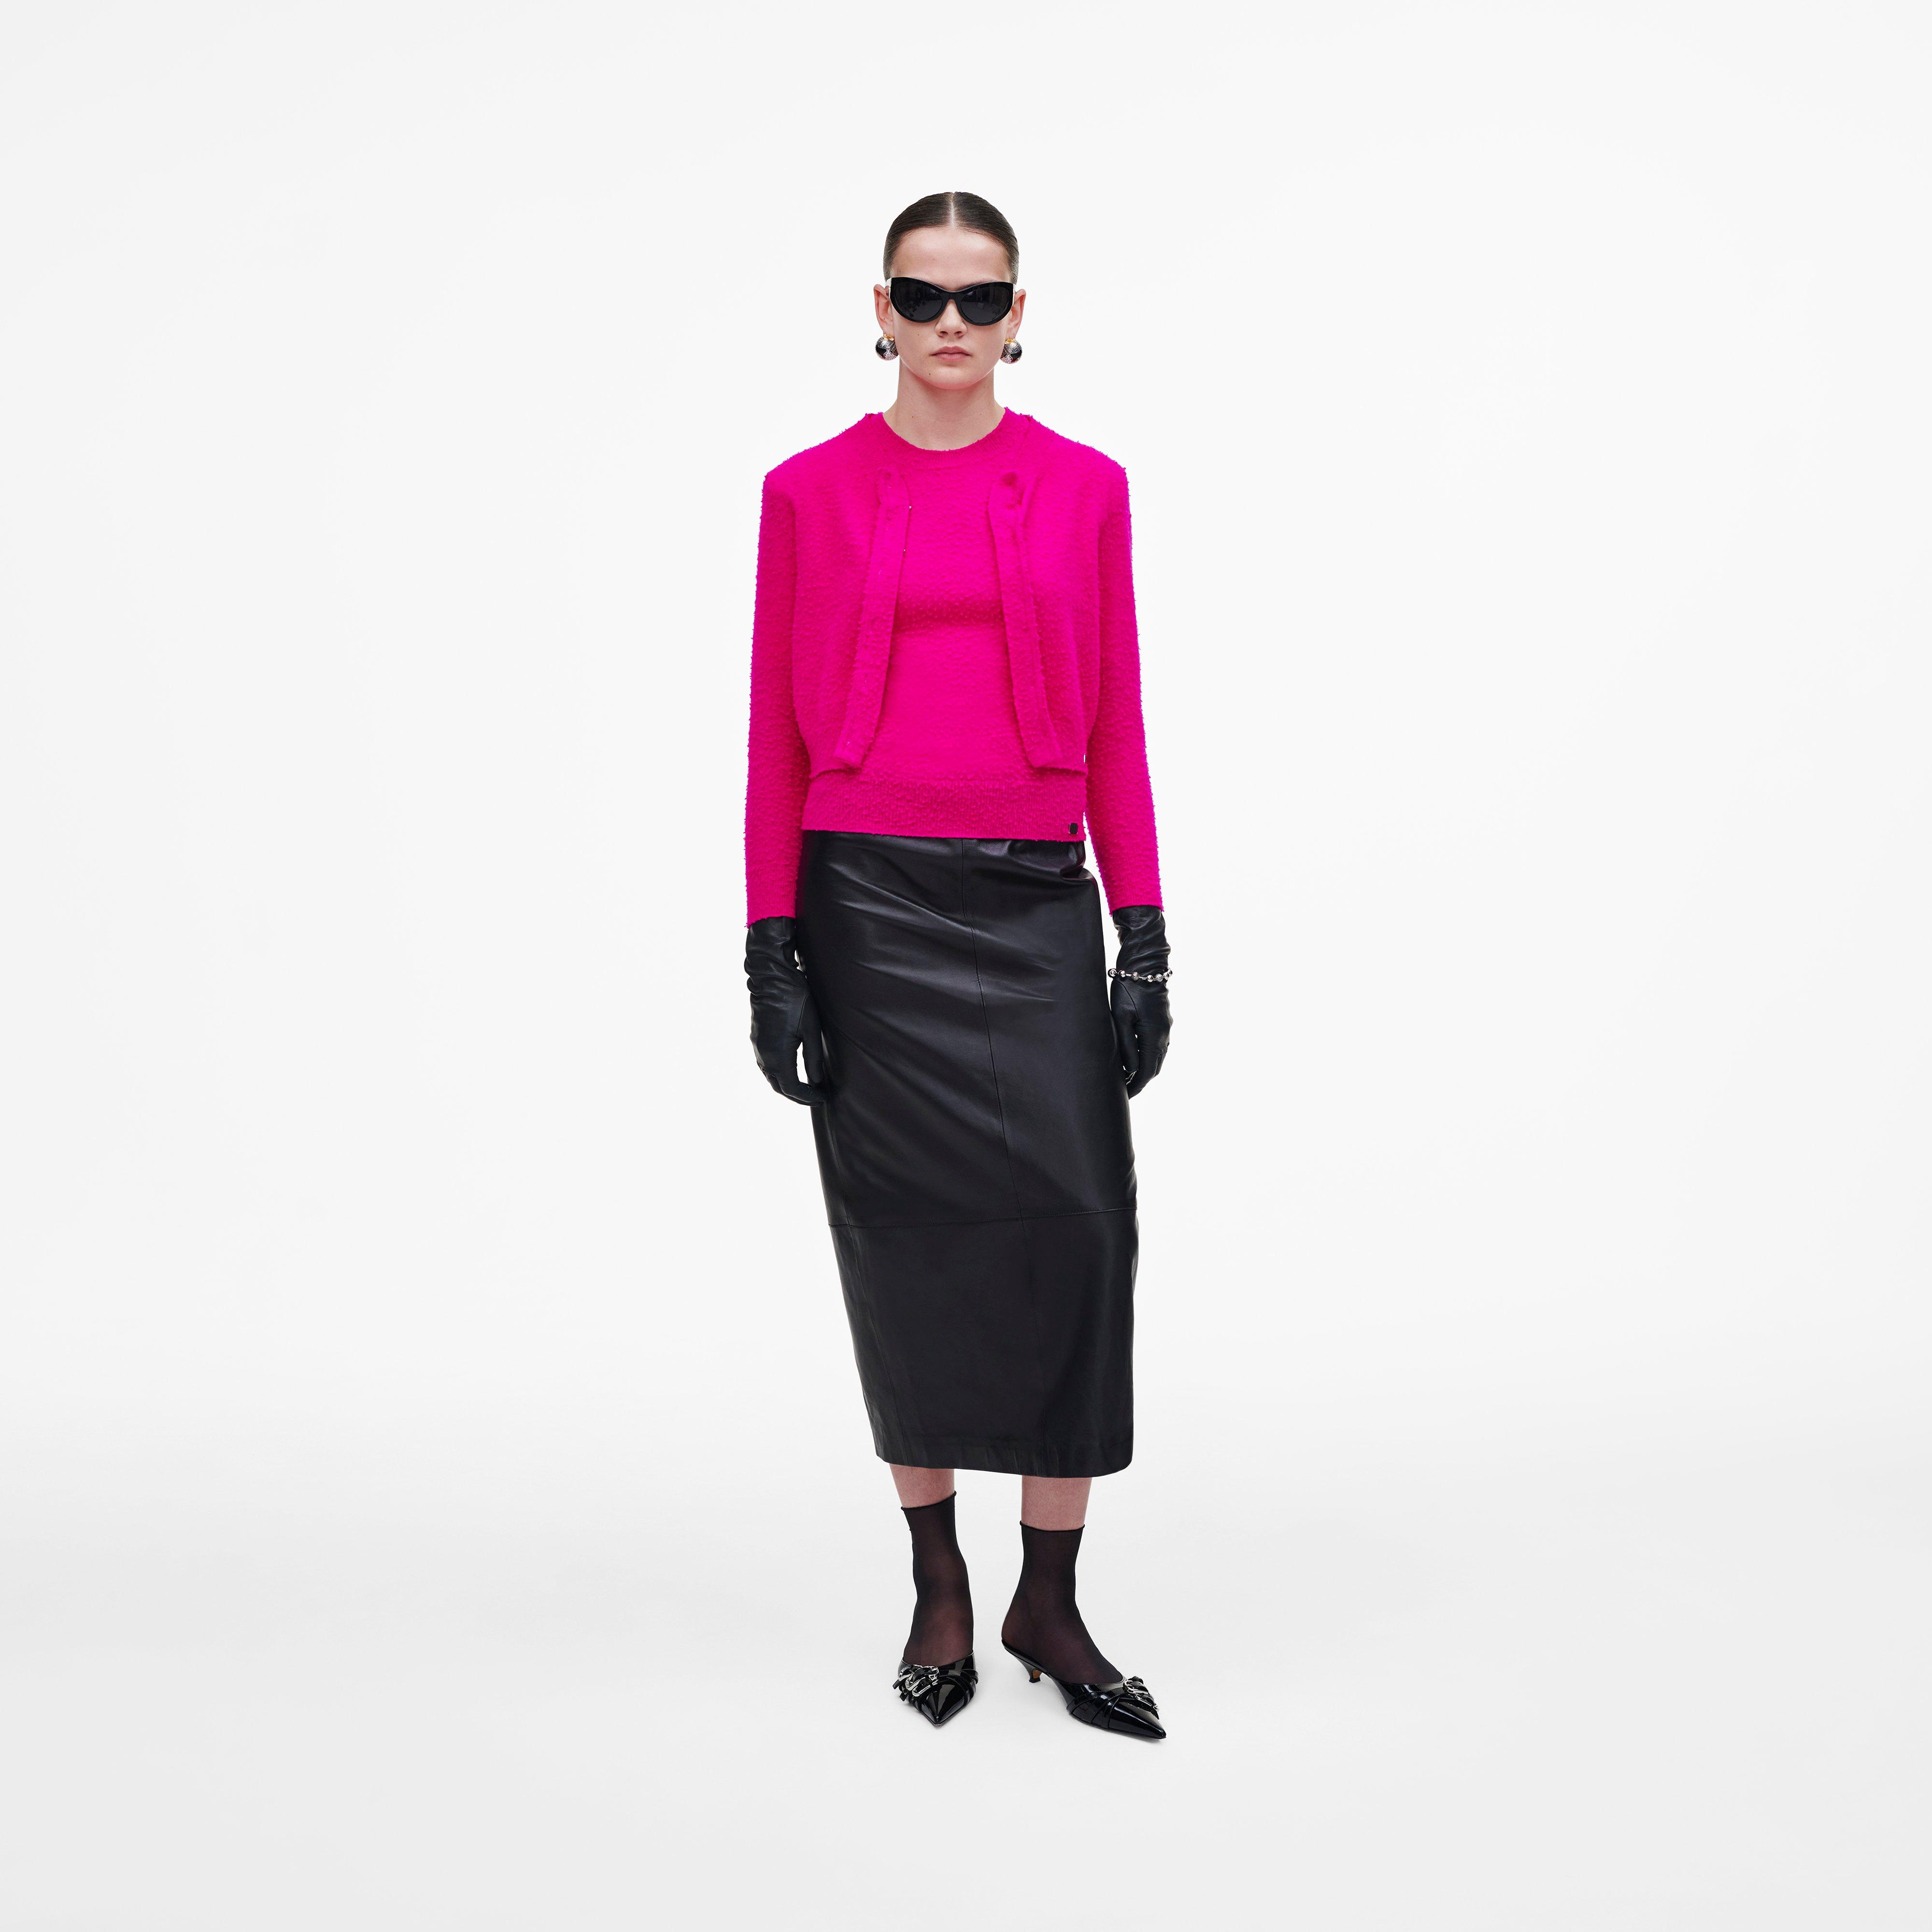 Marc by Marc jacobs Pilled Hook and Eye Cardigan,HOT PINK